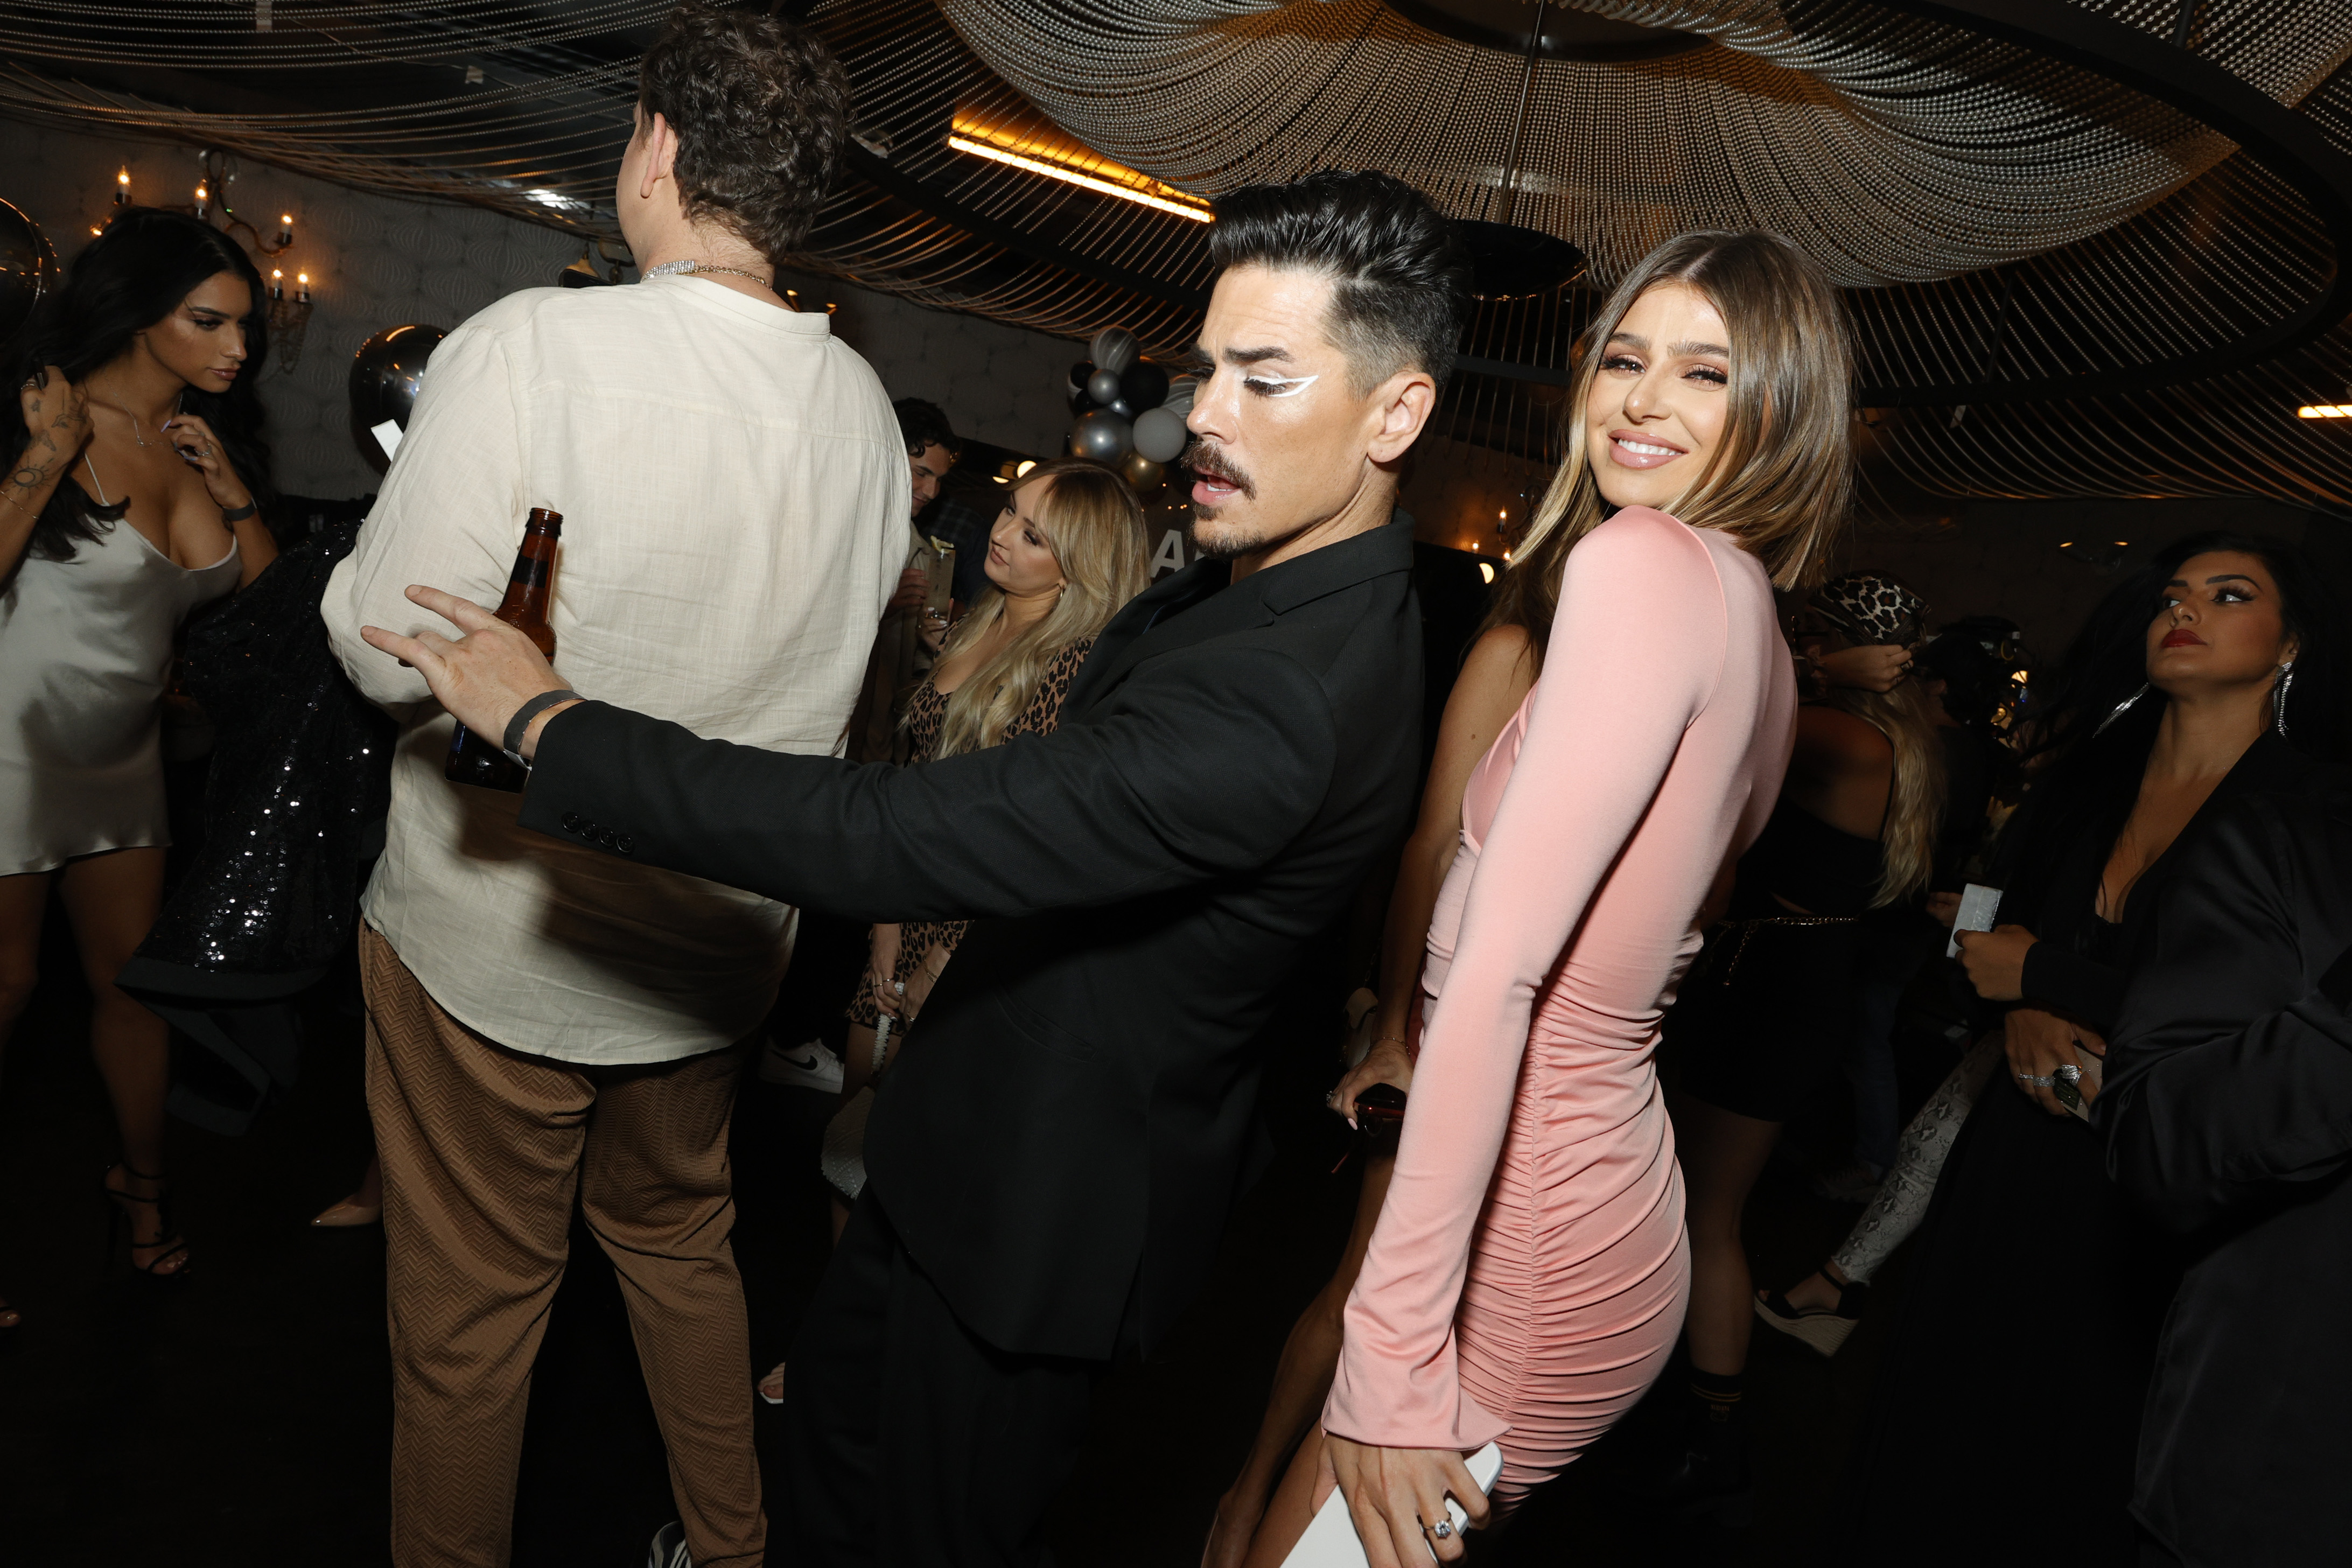 Tom Sandoval and Raquel Leves at the party.